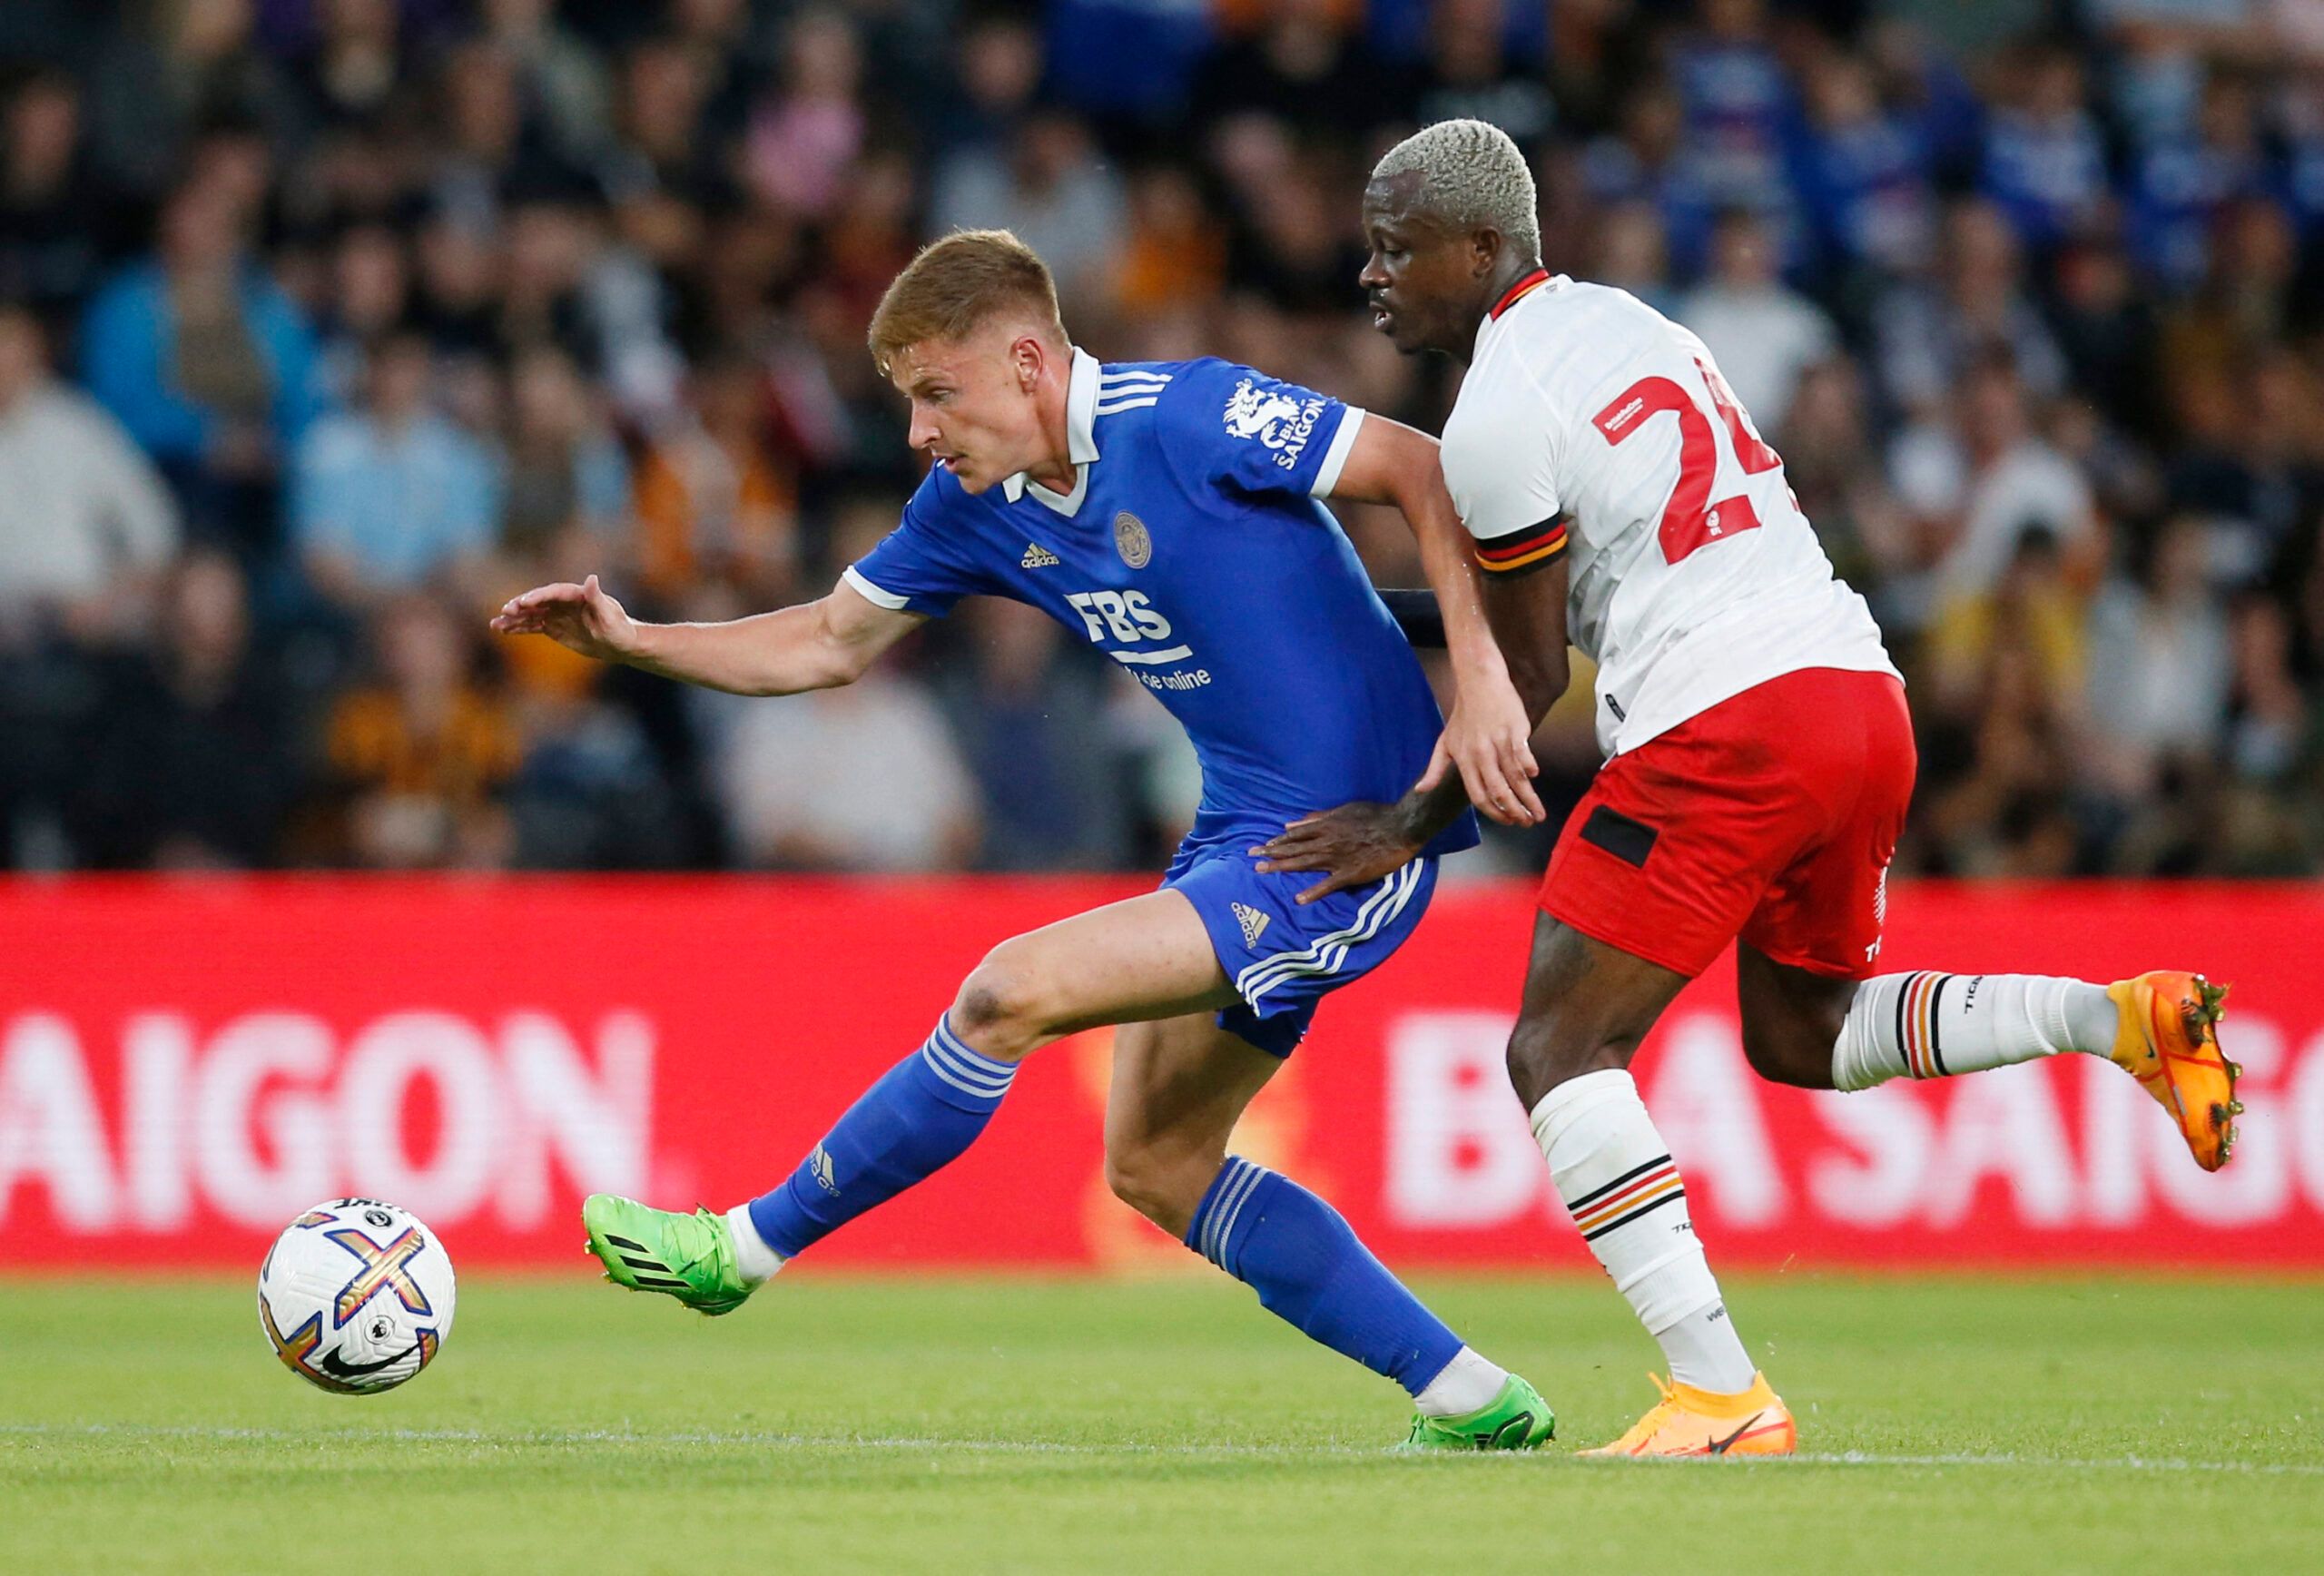 Soccer Football - Pre Season Friendly - Hull City v Leicester City - MKM Stadium, Hull, Britain - July 20, 2022 Leicester City's Harvey Barnes in action with Hull City's Jean Michael Seri Action Images via Reuters/Ed Sykes